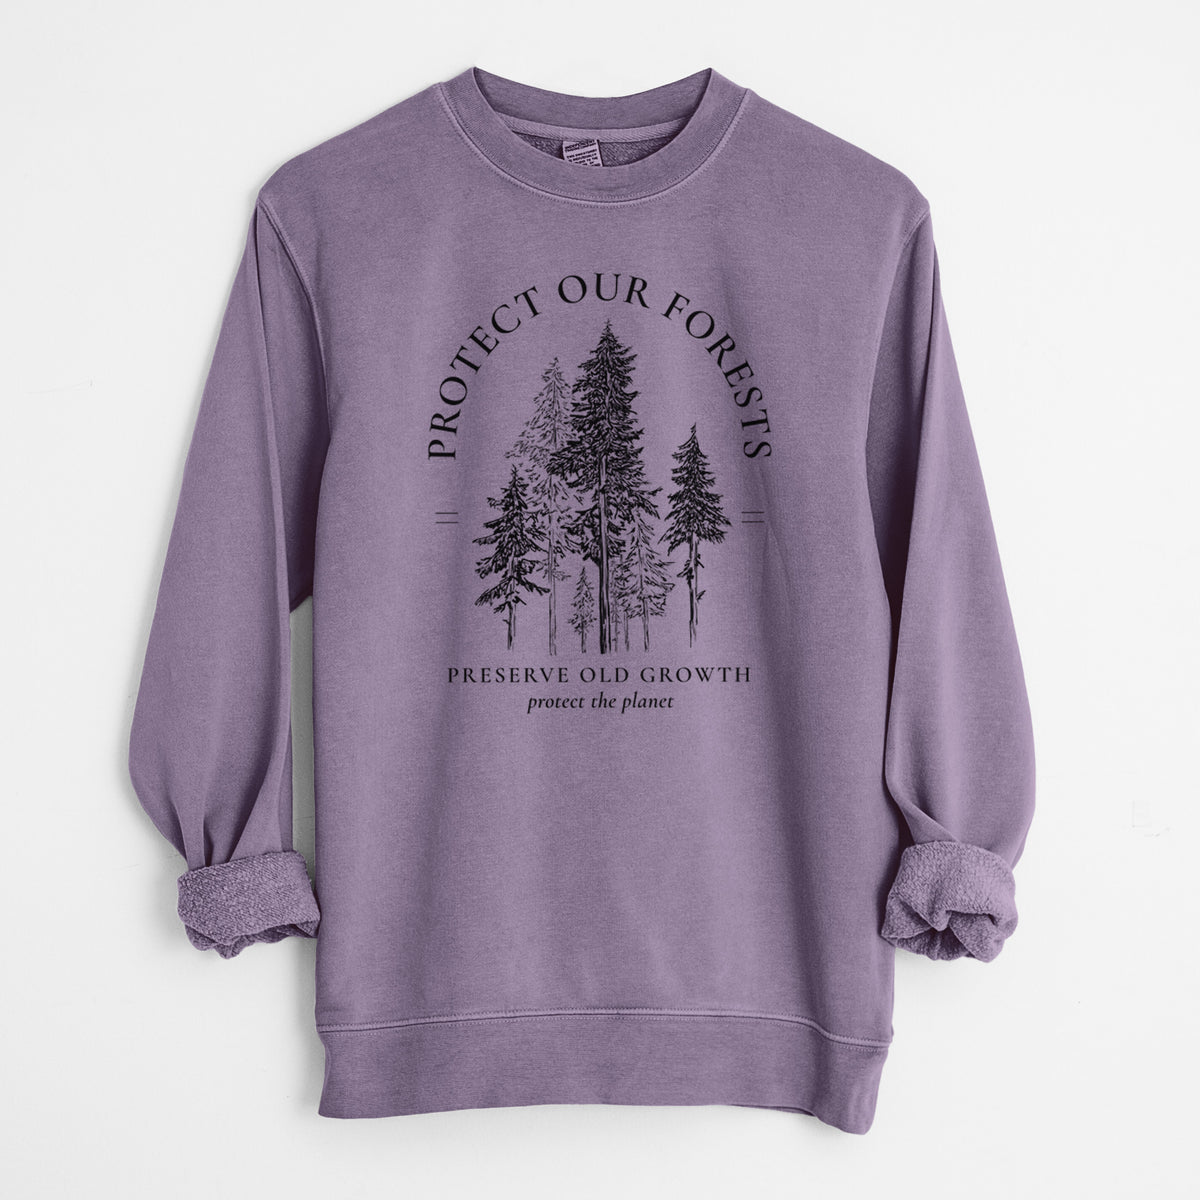 Protect our Forests - Preserve Old Growth - Unisex Pigment Dyed Crew Sweatshirt